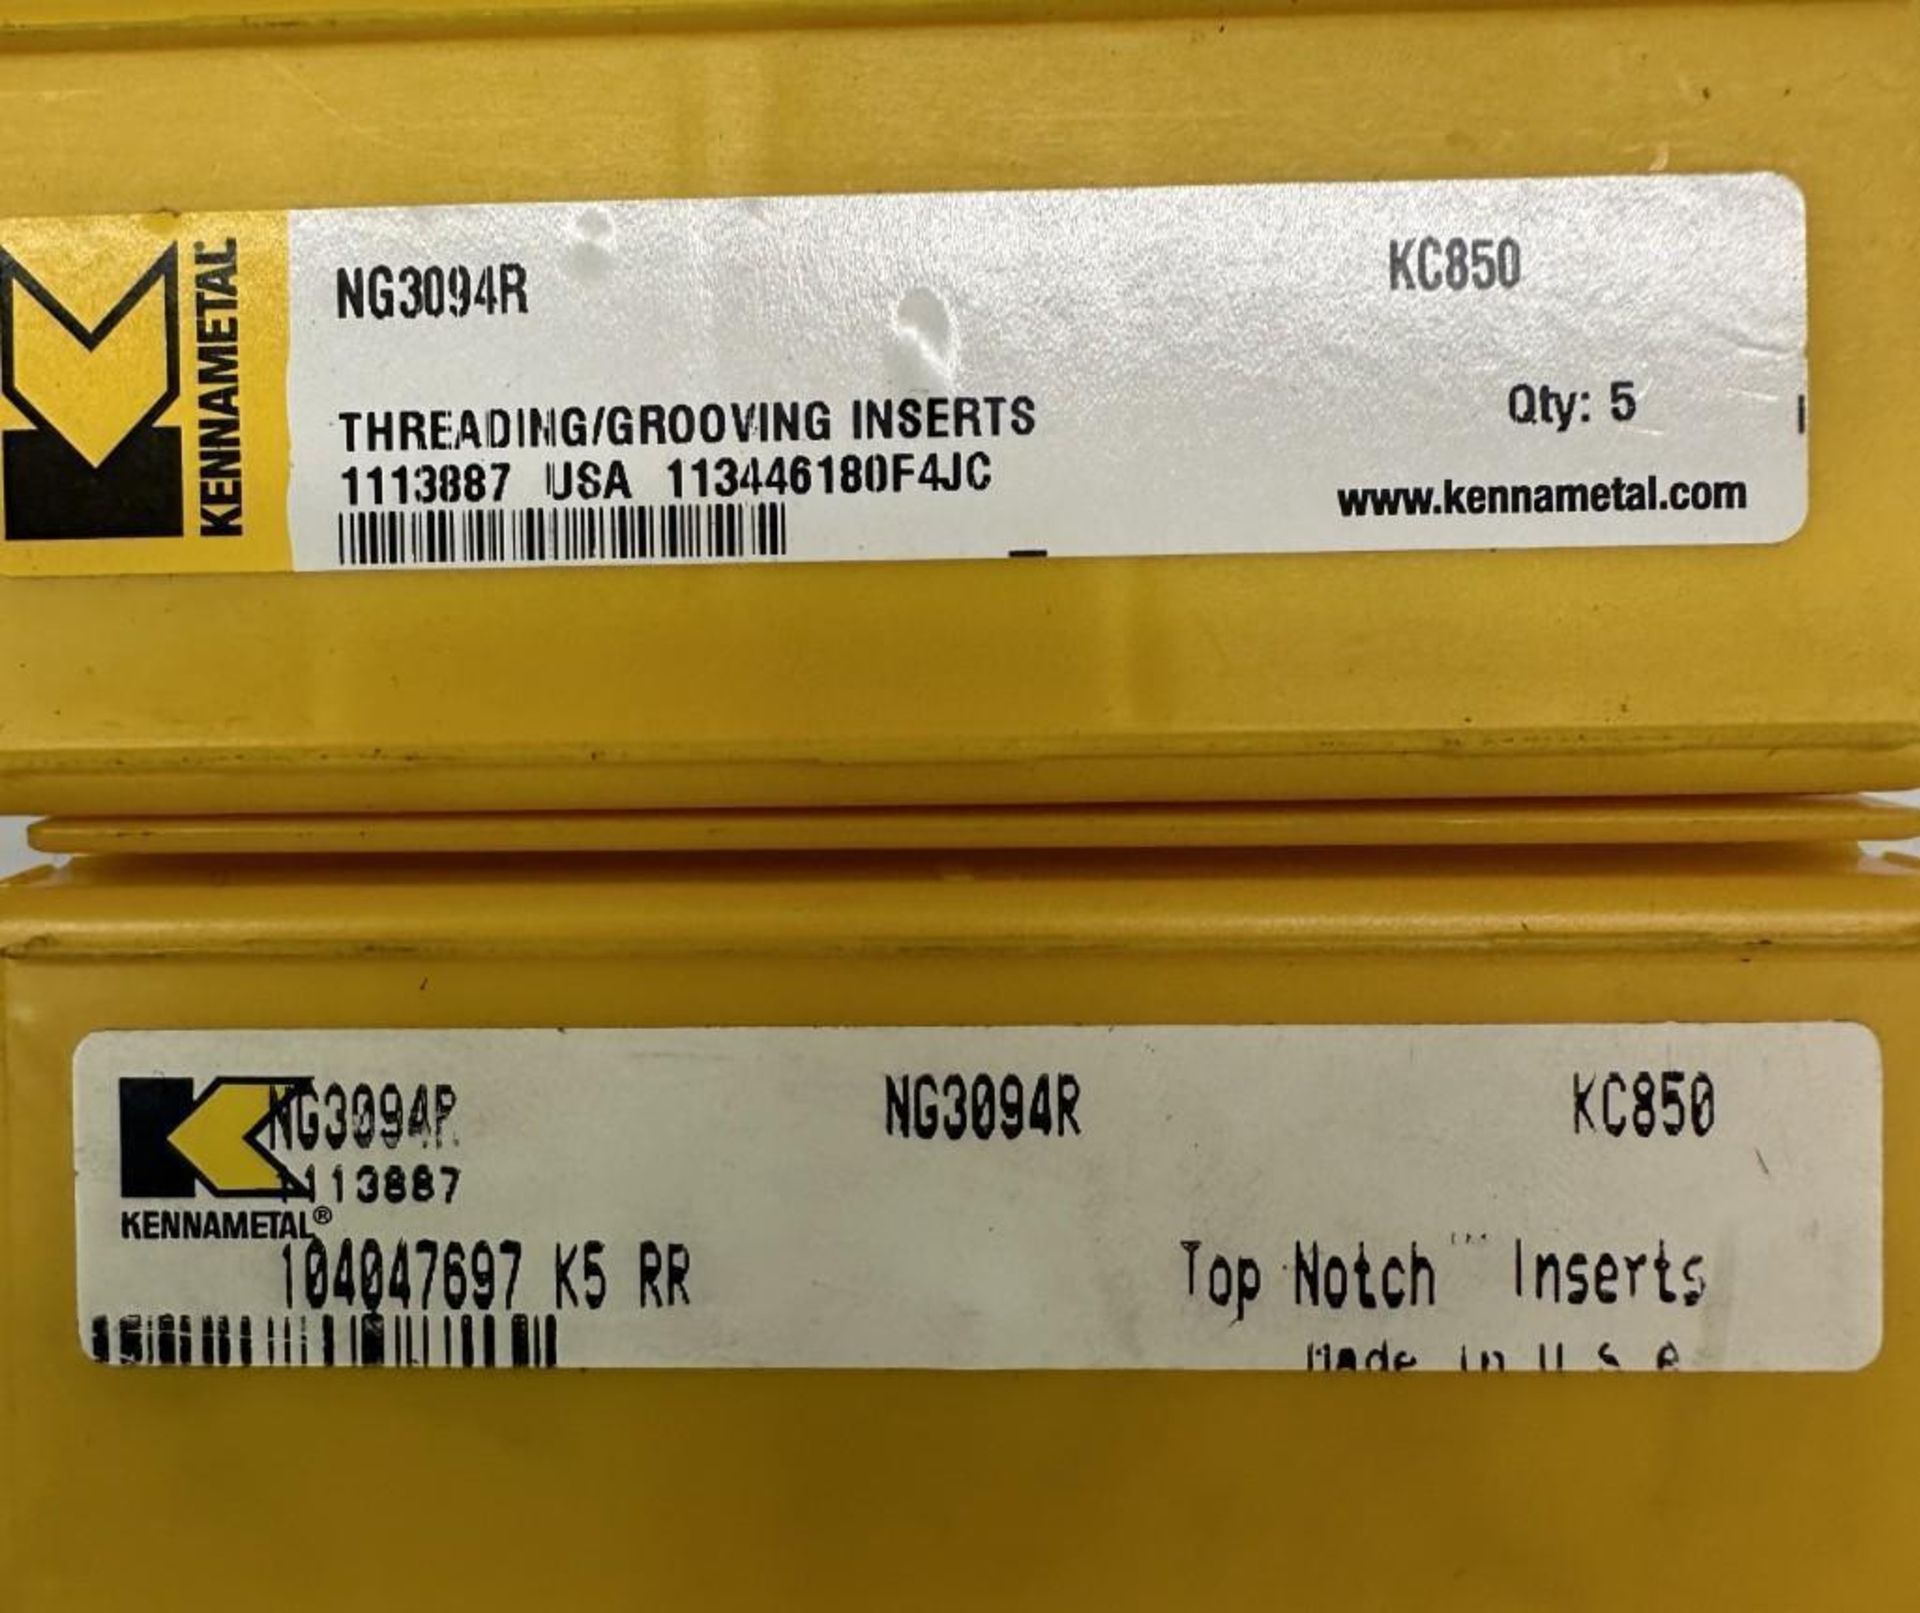 Lot of Kennametal #NG3094R/KC850 Carbide Inserts - Image 3 of 3